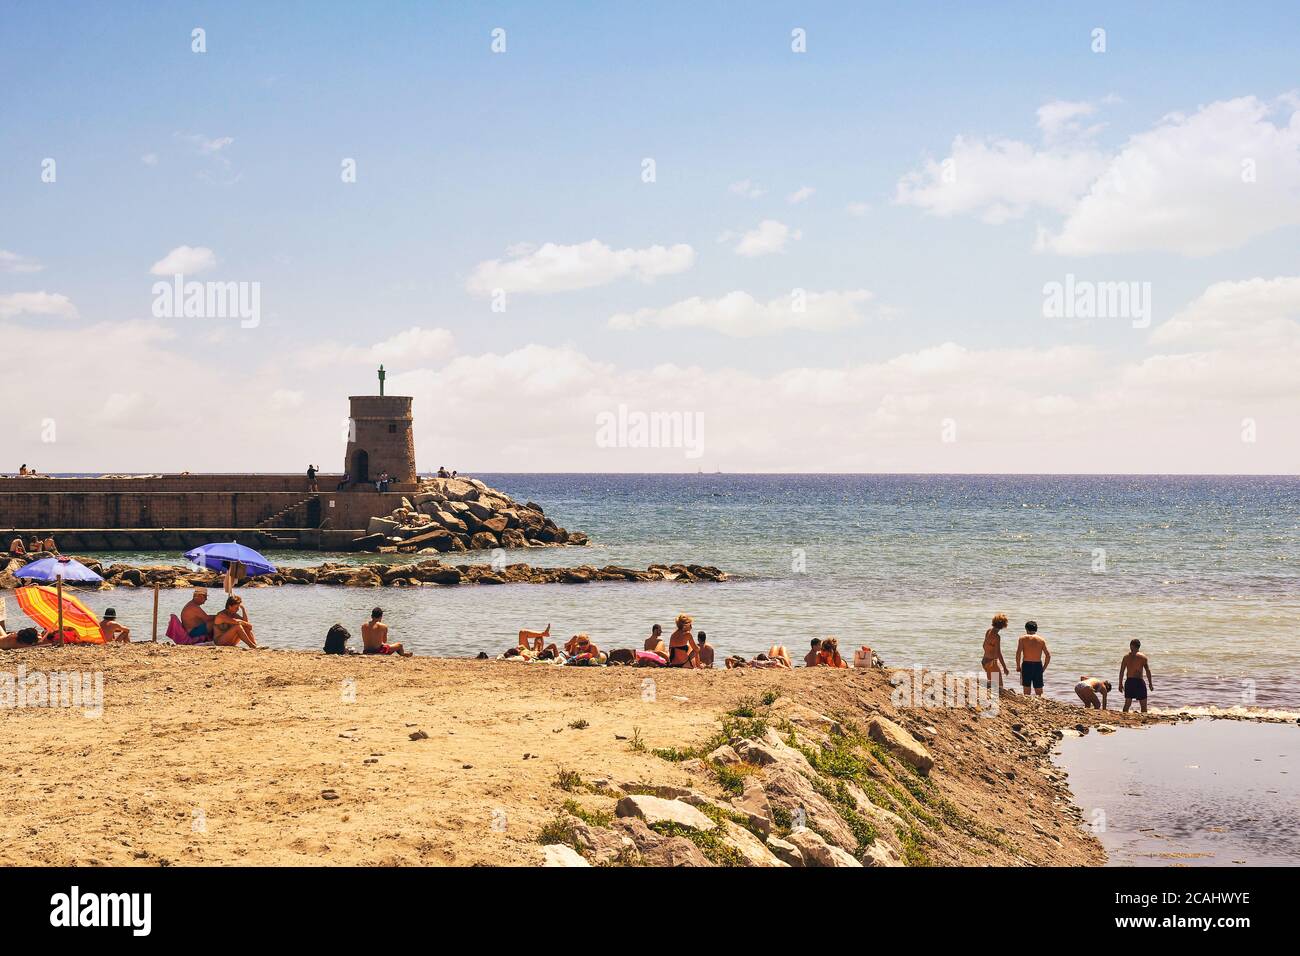 View of the free beach with vacationers and the stone lighthouse on the pier overlooking the Gulf of Paradise, Recco, Genoa, Liguria, Italy Stock Photo